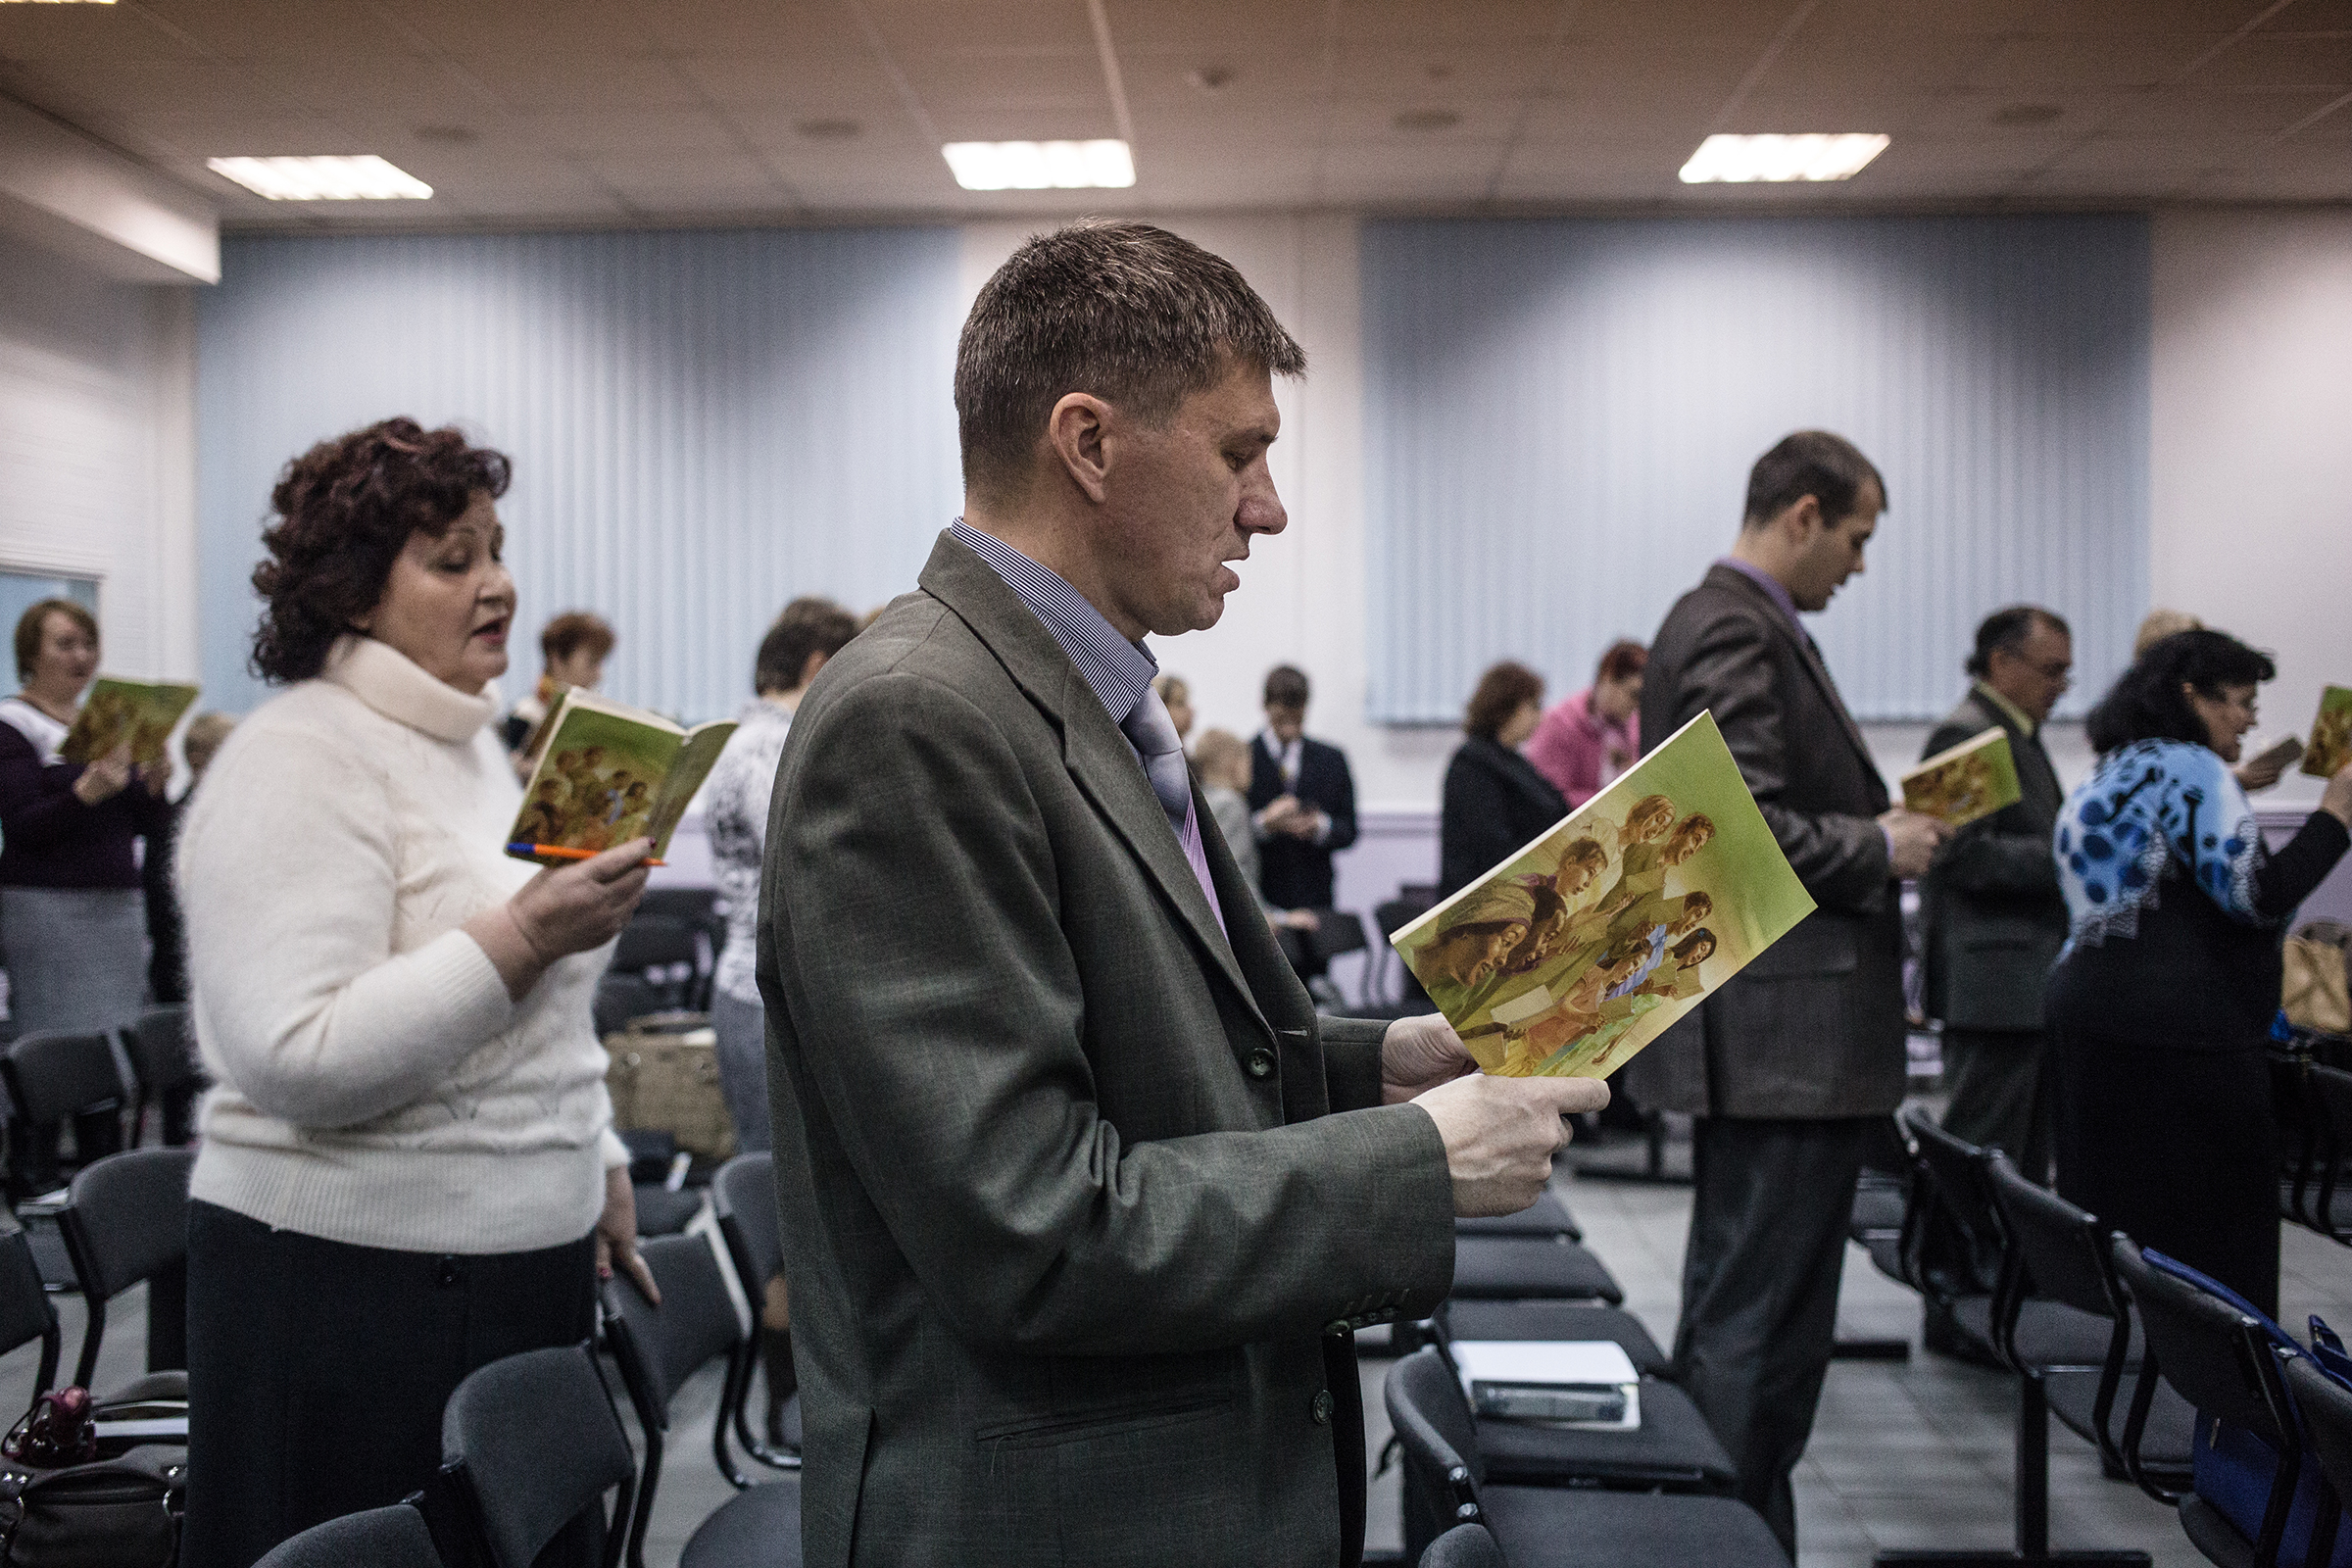 Jehovah's Witnesses sing songs at the beginning of a meeting in Rostov-on-Don on Nov. 13, 2015. (Alexander Aksakov—For The Washington Post via Getty Images)